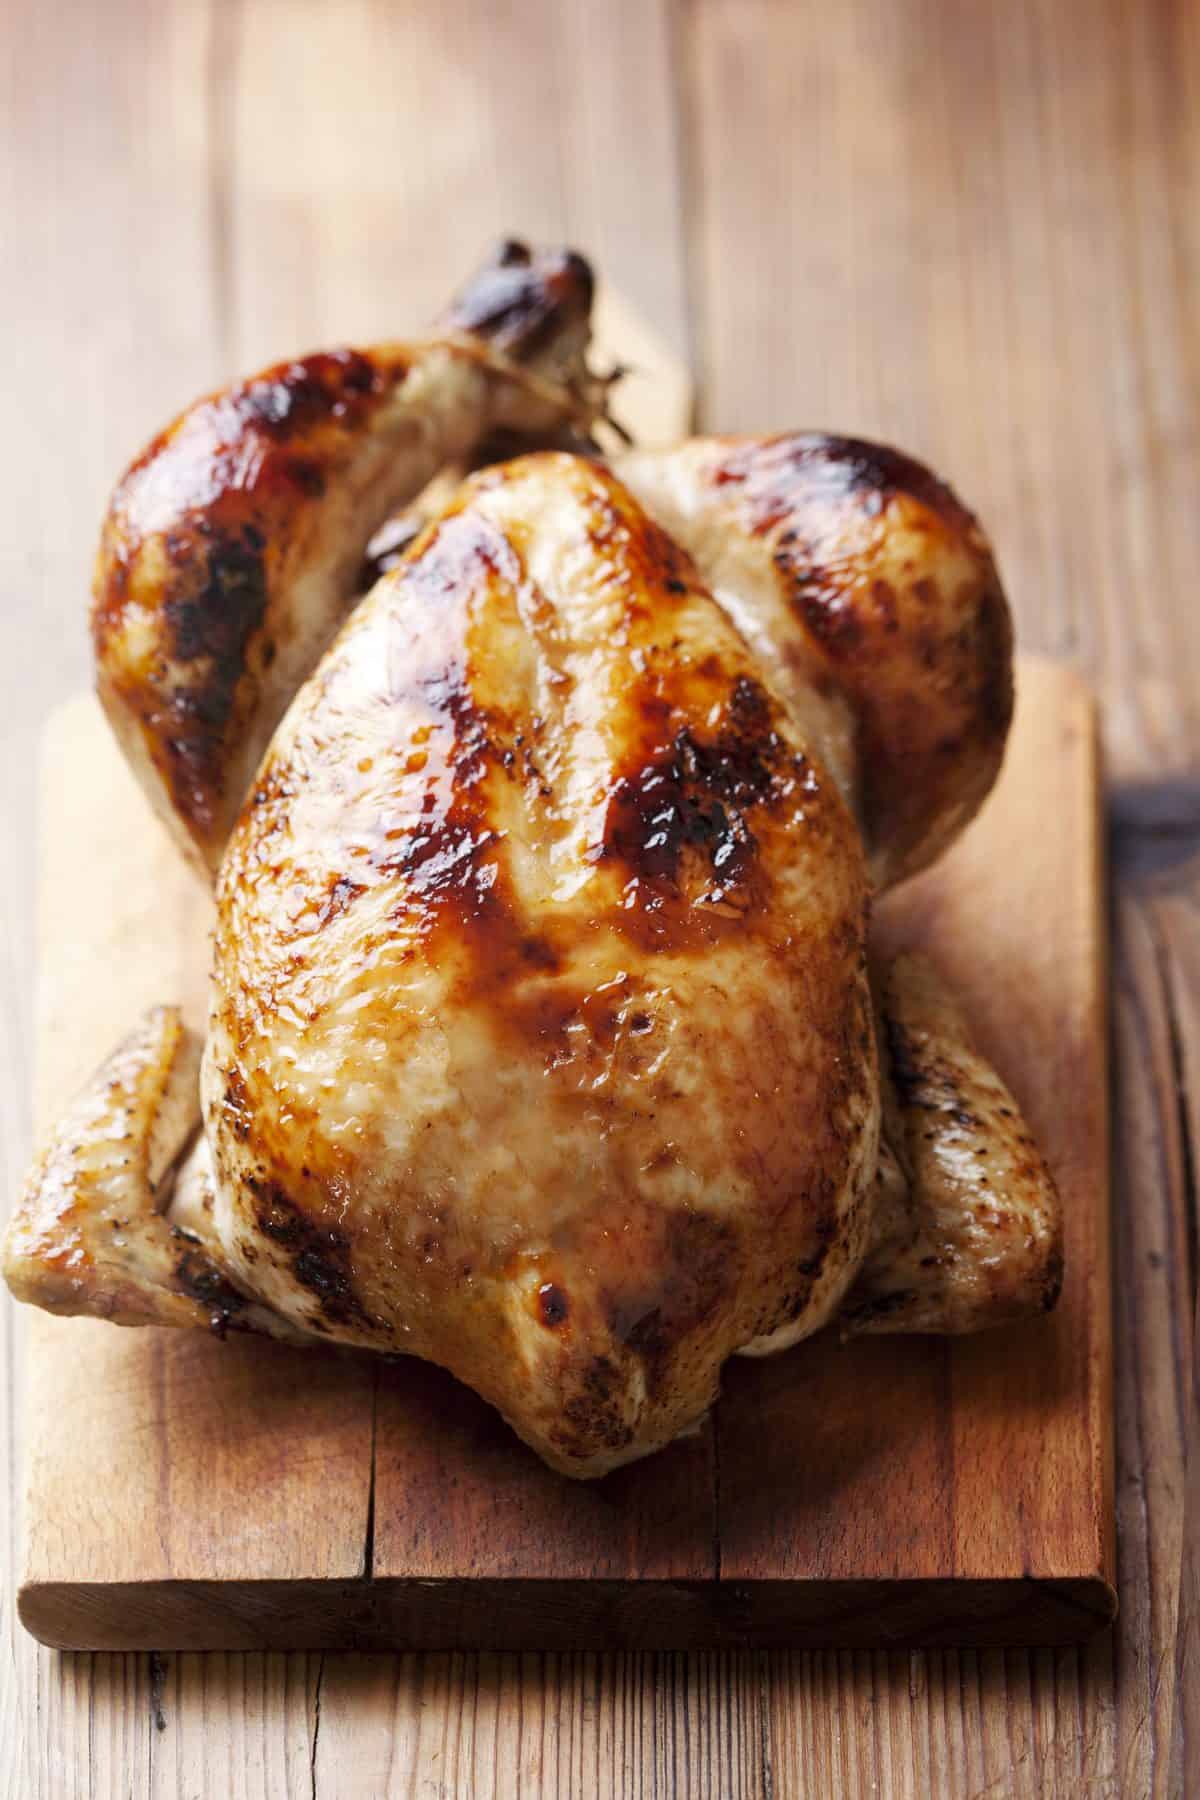 Why I LOVE Rotisserie Chickens (and 22+ Healthy Rotisserie Chicken Recipes)